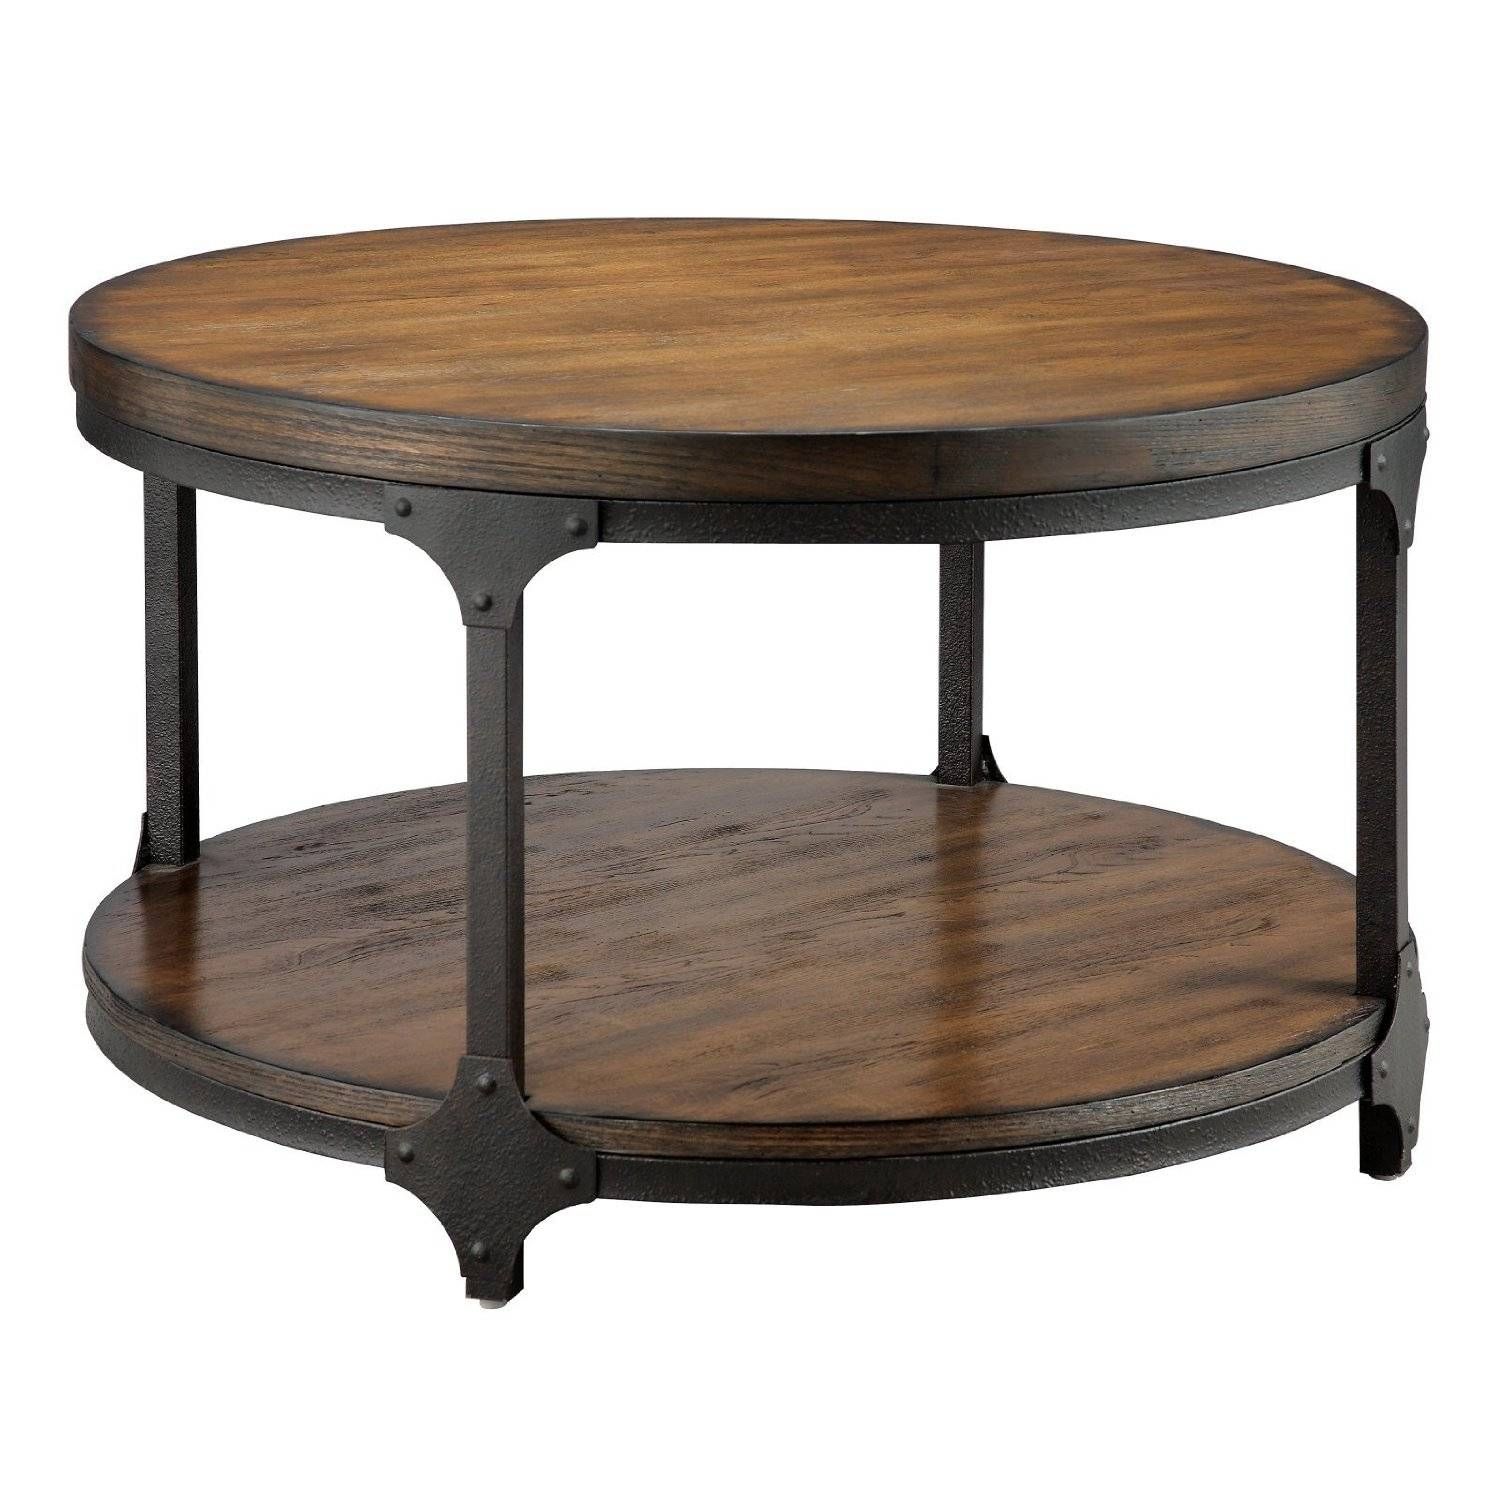 Coffee Tables: Wonderful Round Wood Coffee Tables Design Ideas Throughout Industrial Round Coffee Tables (View 7 of 15)